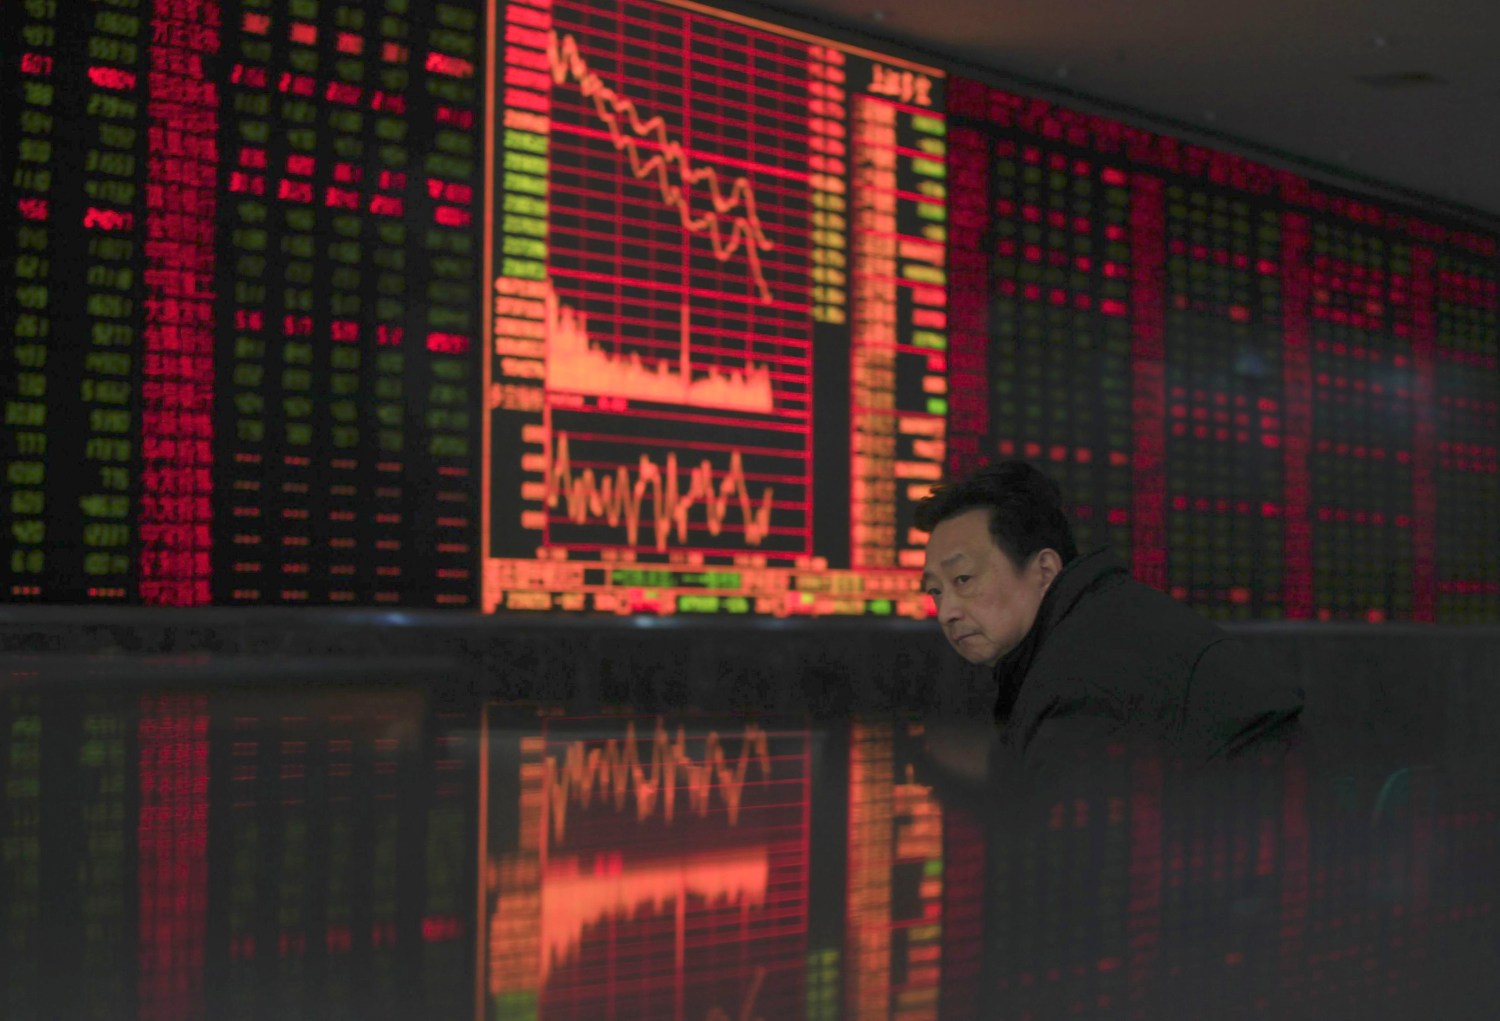 An investor sits in front of an electronic board showing stock information at a brokerage house in Wuhan, Hubei province January 4, 2012. China shares started the new year weaker on Wednesday, dragged down by more cyclical sectors after the Chinese premier warned of difficult economic conditions in the first quarter, hinting there will not be another massive fiscal stimulus programme. REUTERS/Stringer (CHINA - Tags: BUSINESS) CHINA OUT. NO COMMERCIAL OR EDITORIAL SALES IN CHINA - GM1E81418CH01